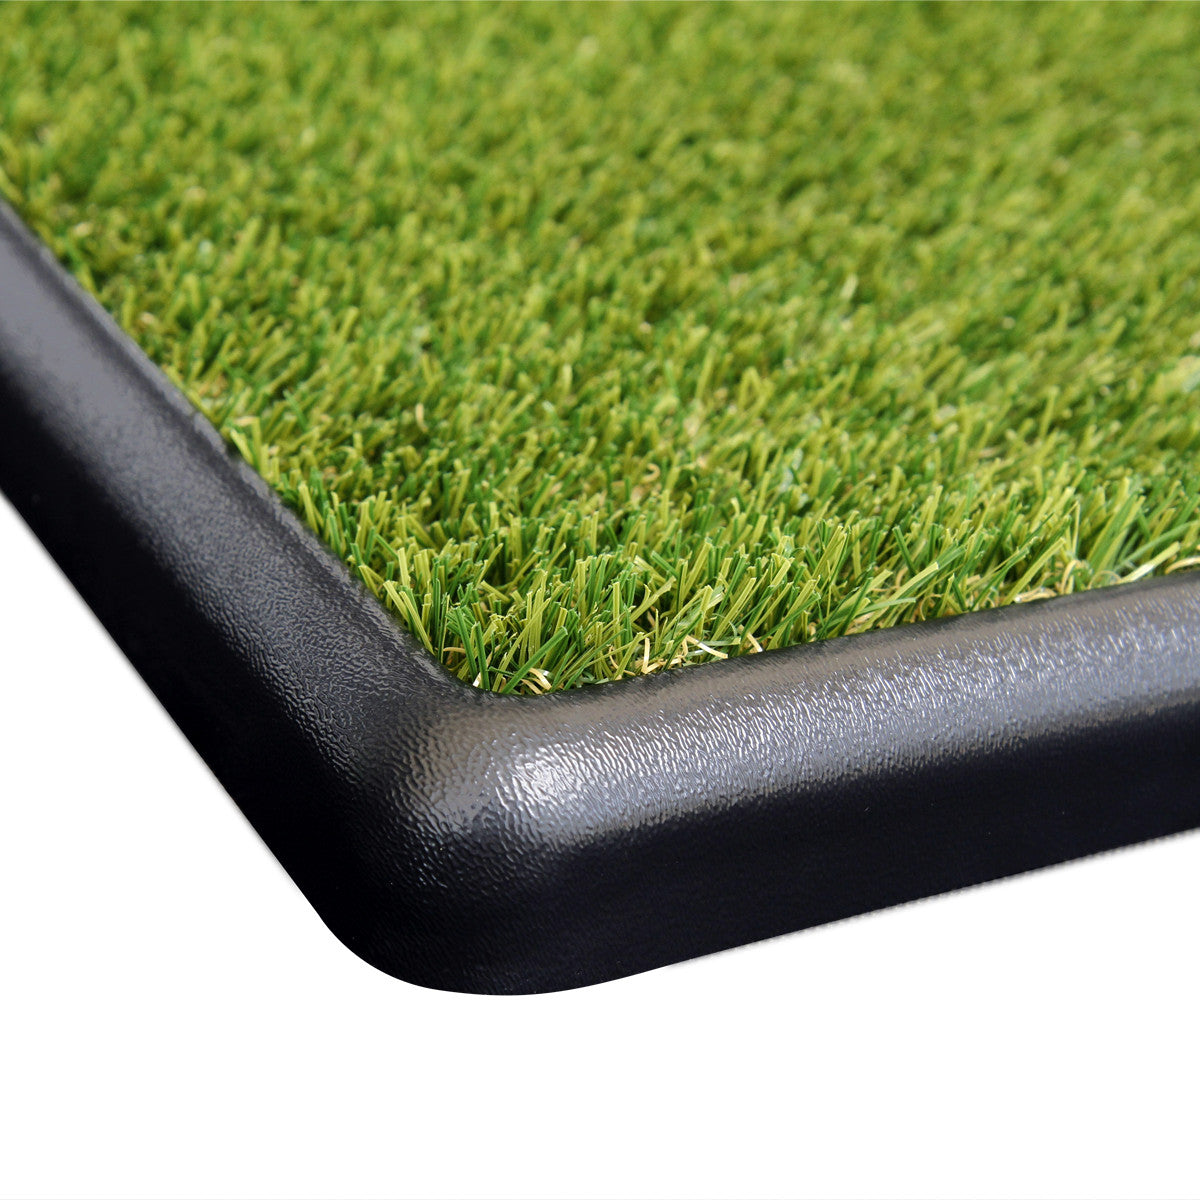 Grass fits snug to tray for cats to dig and scratch